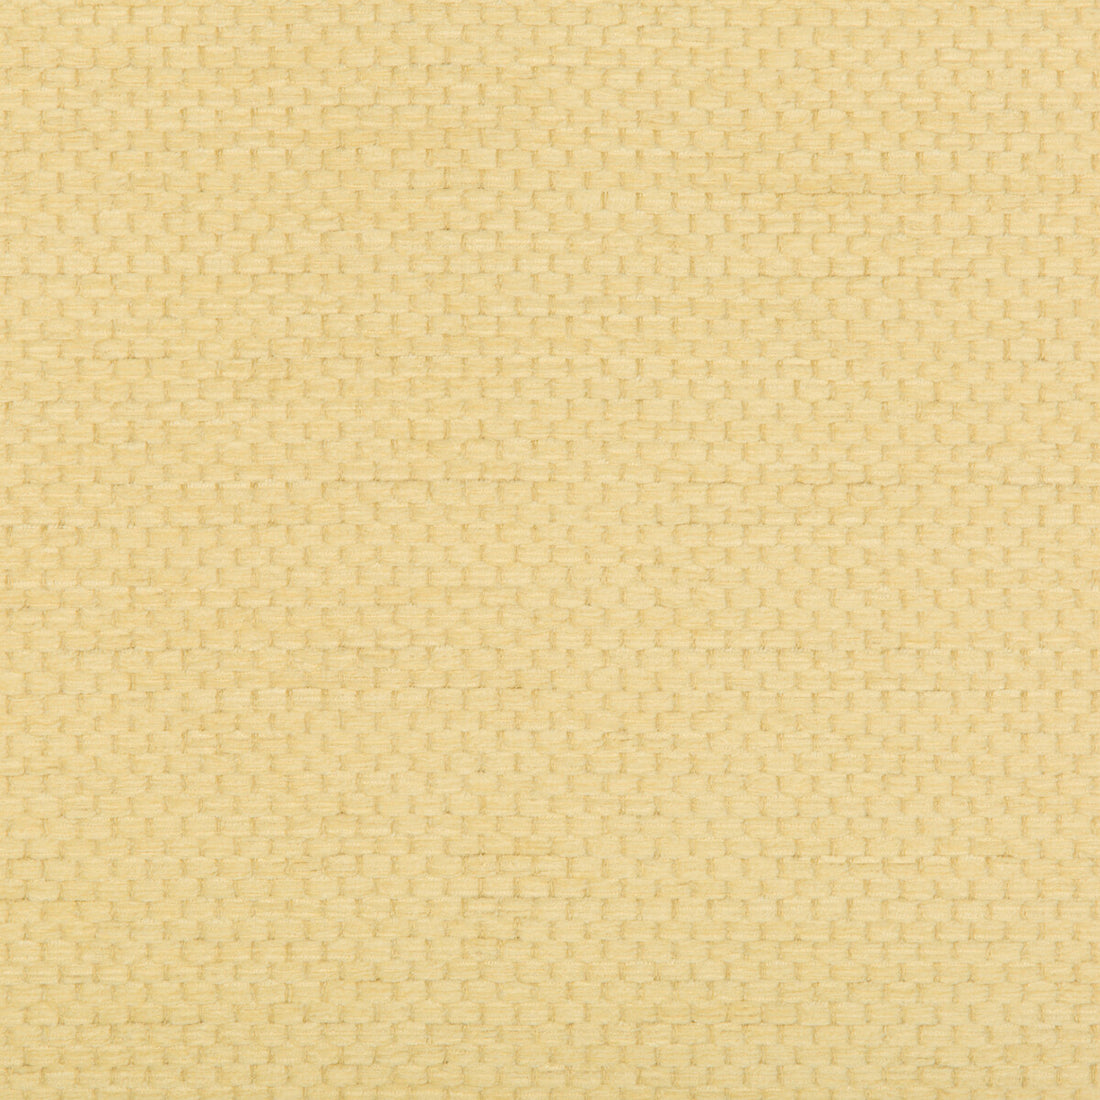 Reserve fabric in buttercream color - pattern 35056.114.0 - by Kravet Contract in the Gis Crypton collection